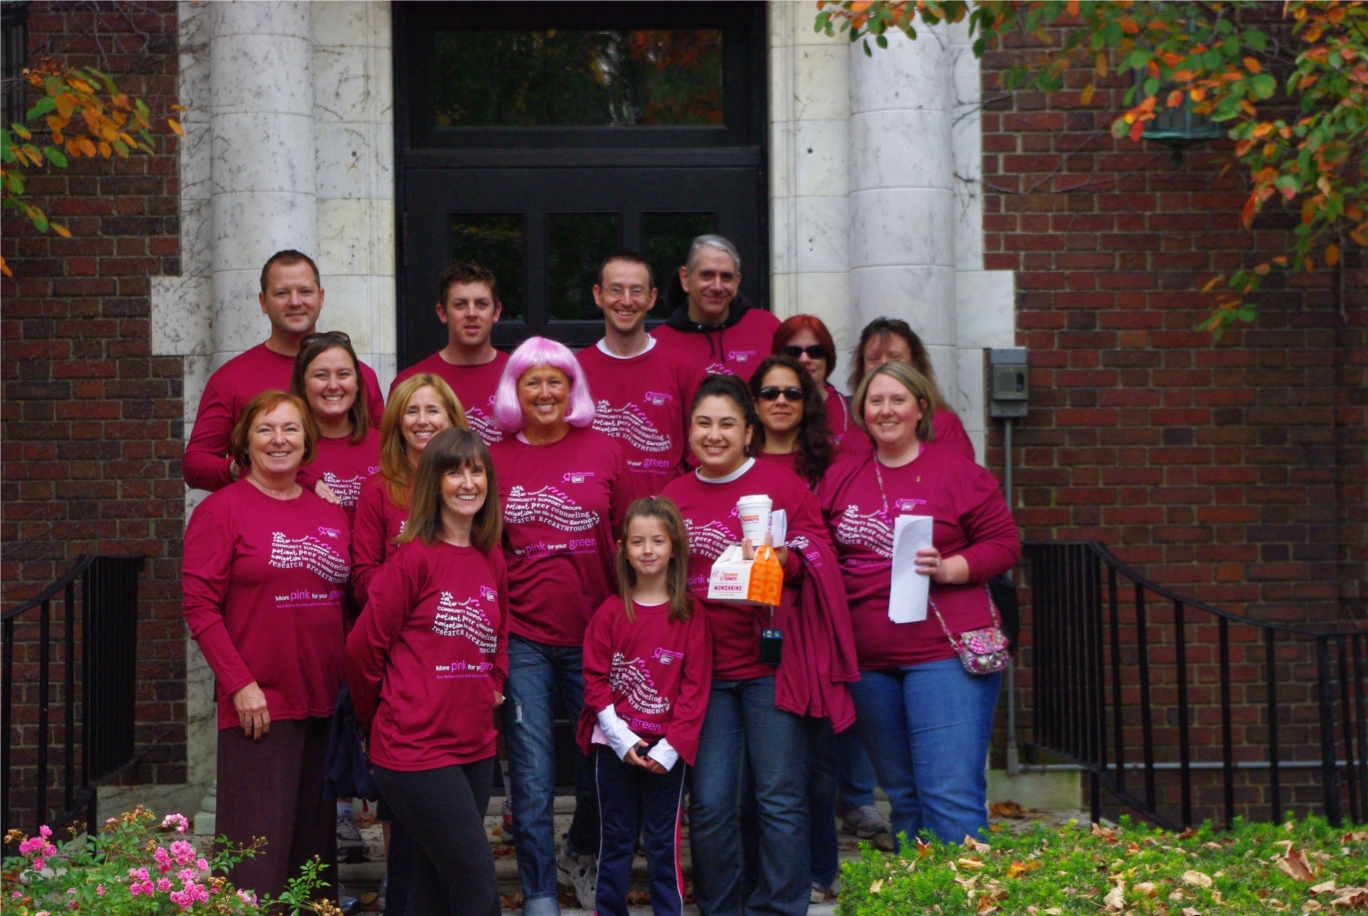 Our DMG team for the Making Strides Against Breast Cancer Walk 2011